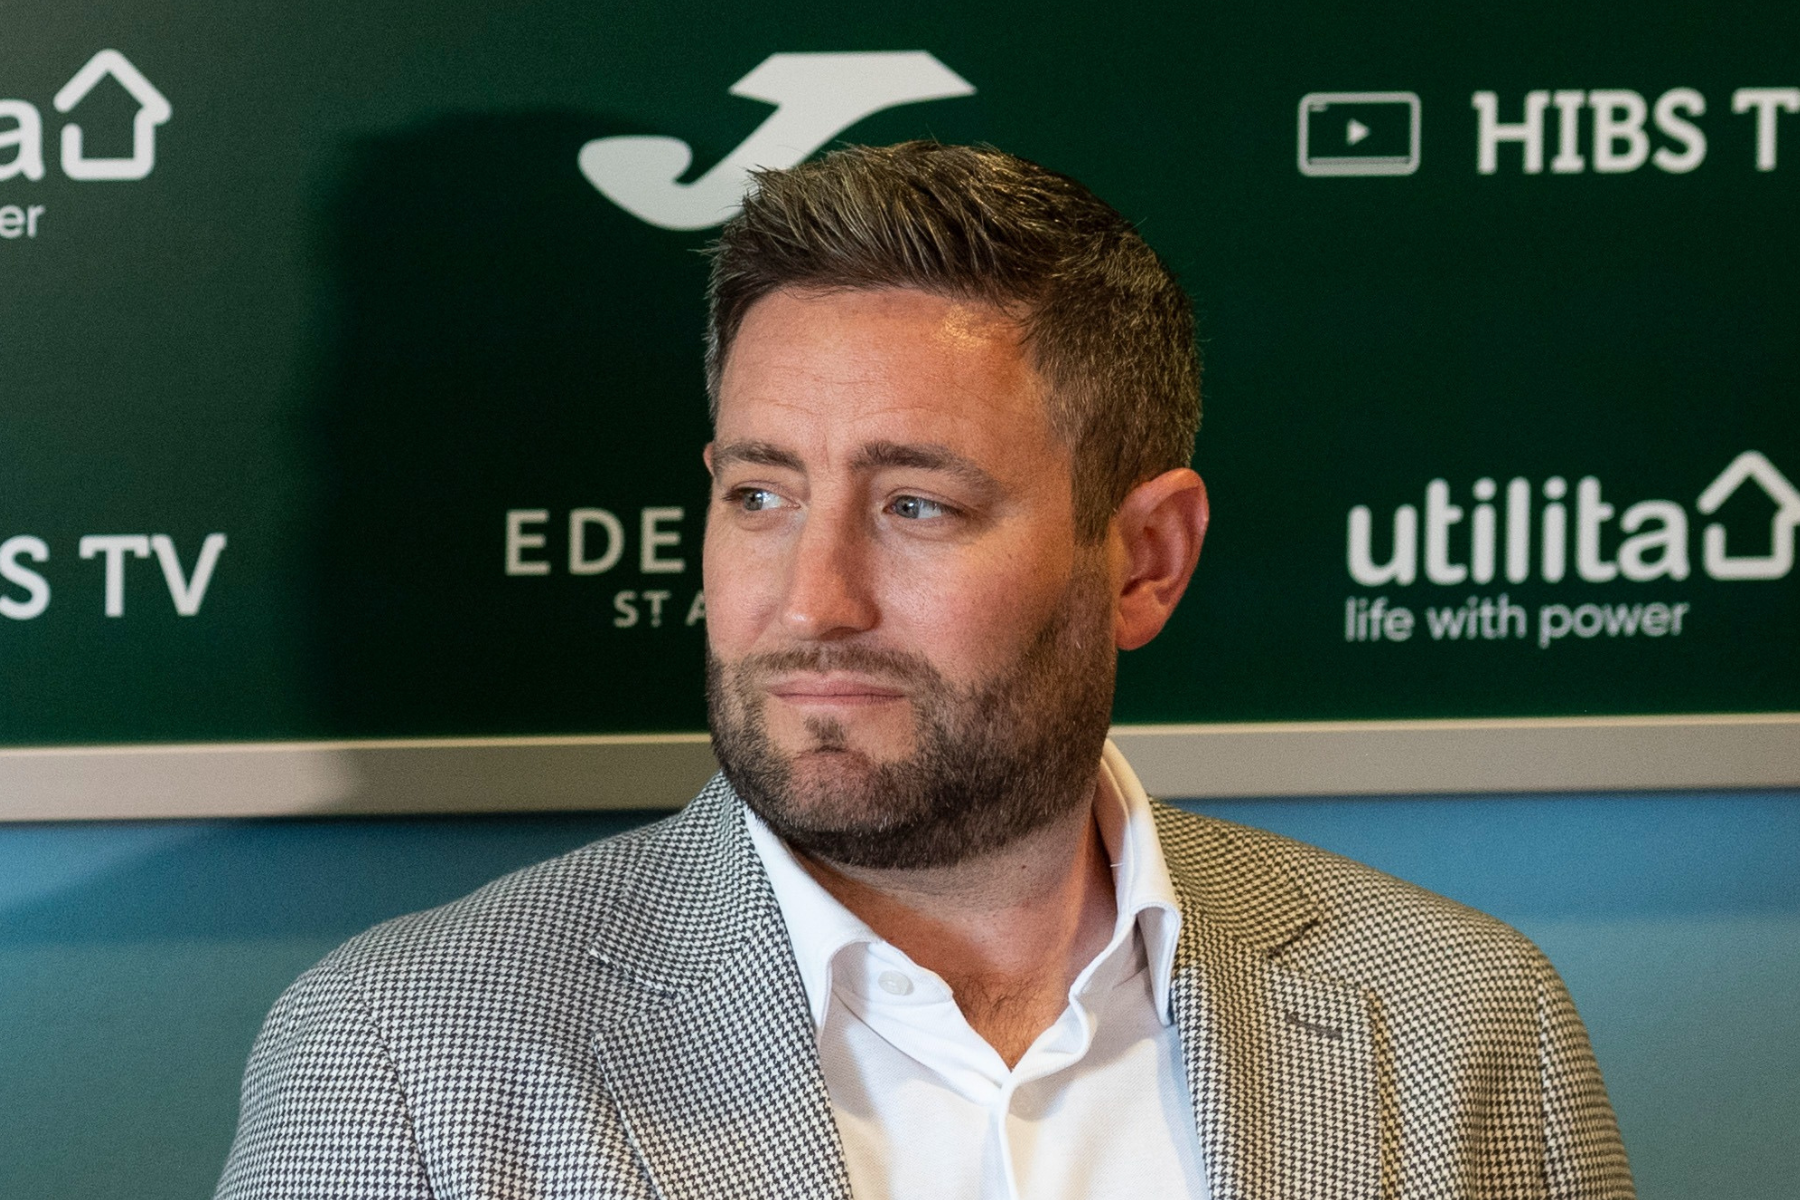 Lee Johnson reveals he didn't apply for Hibs job due to outsider 'perception'